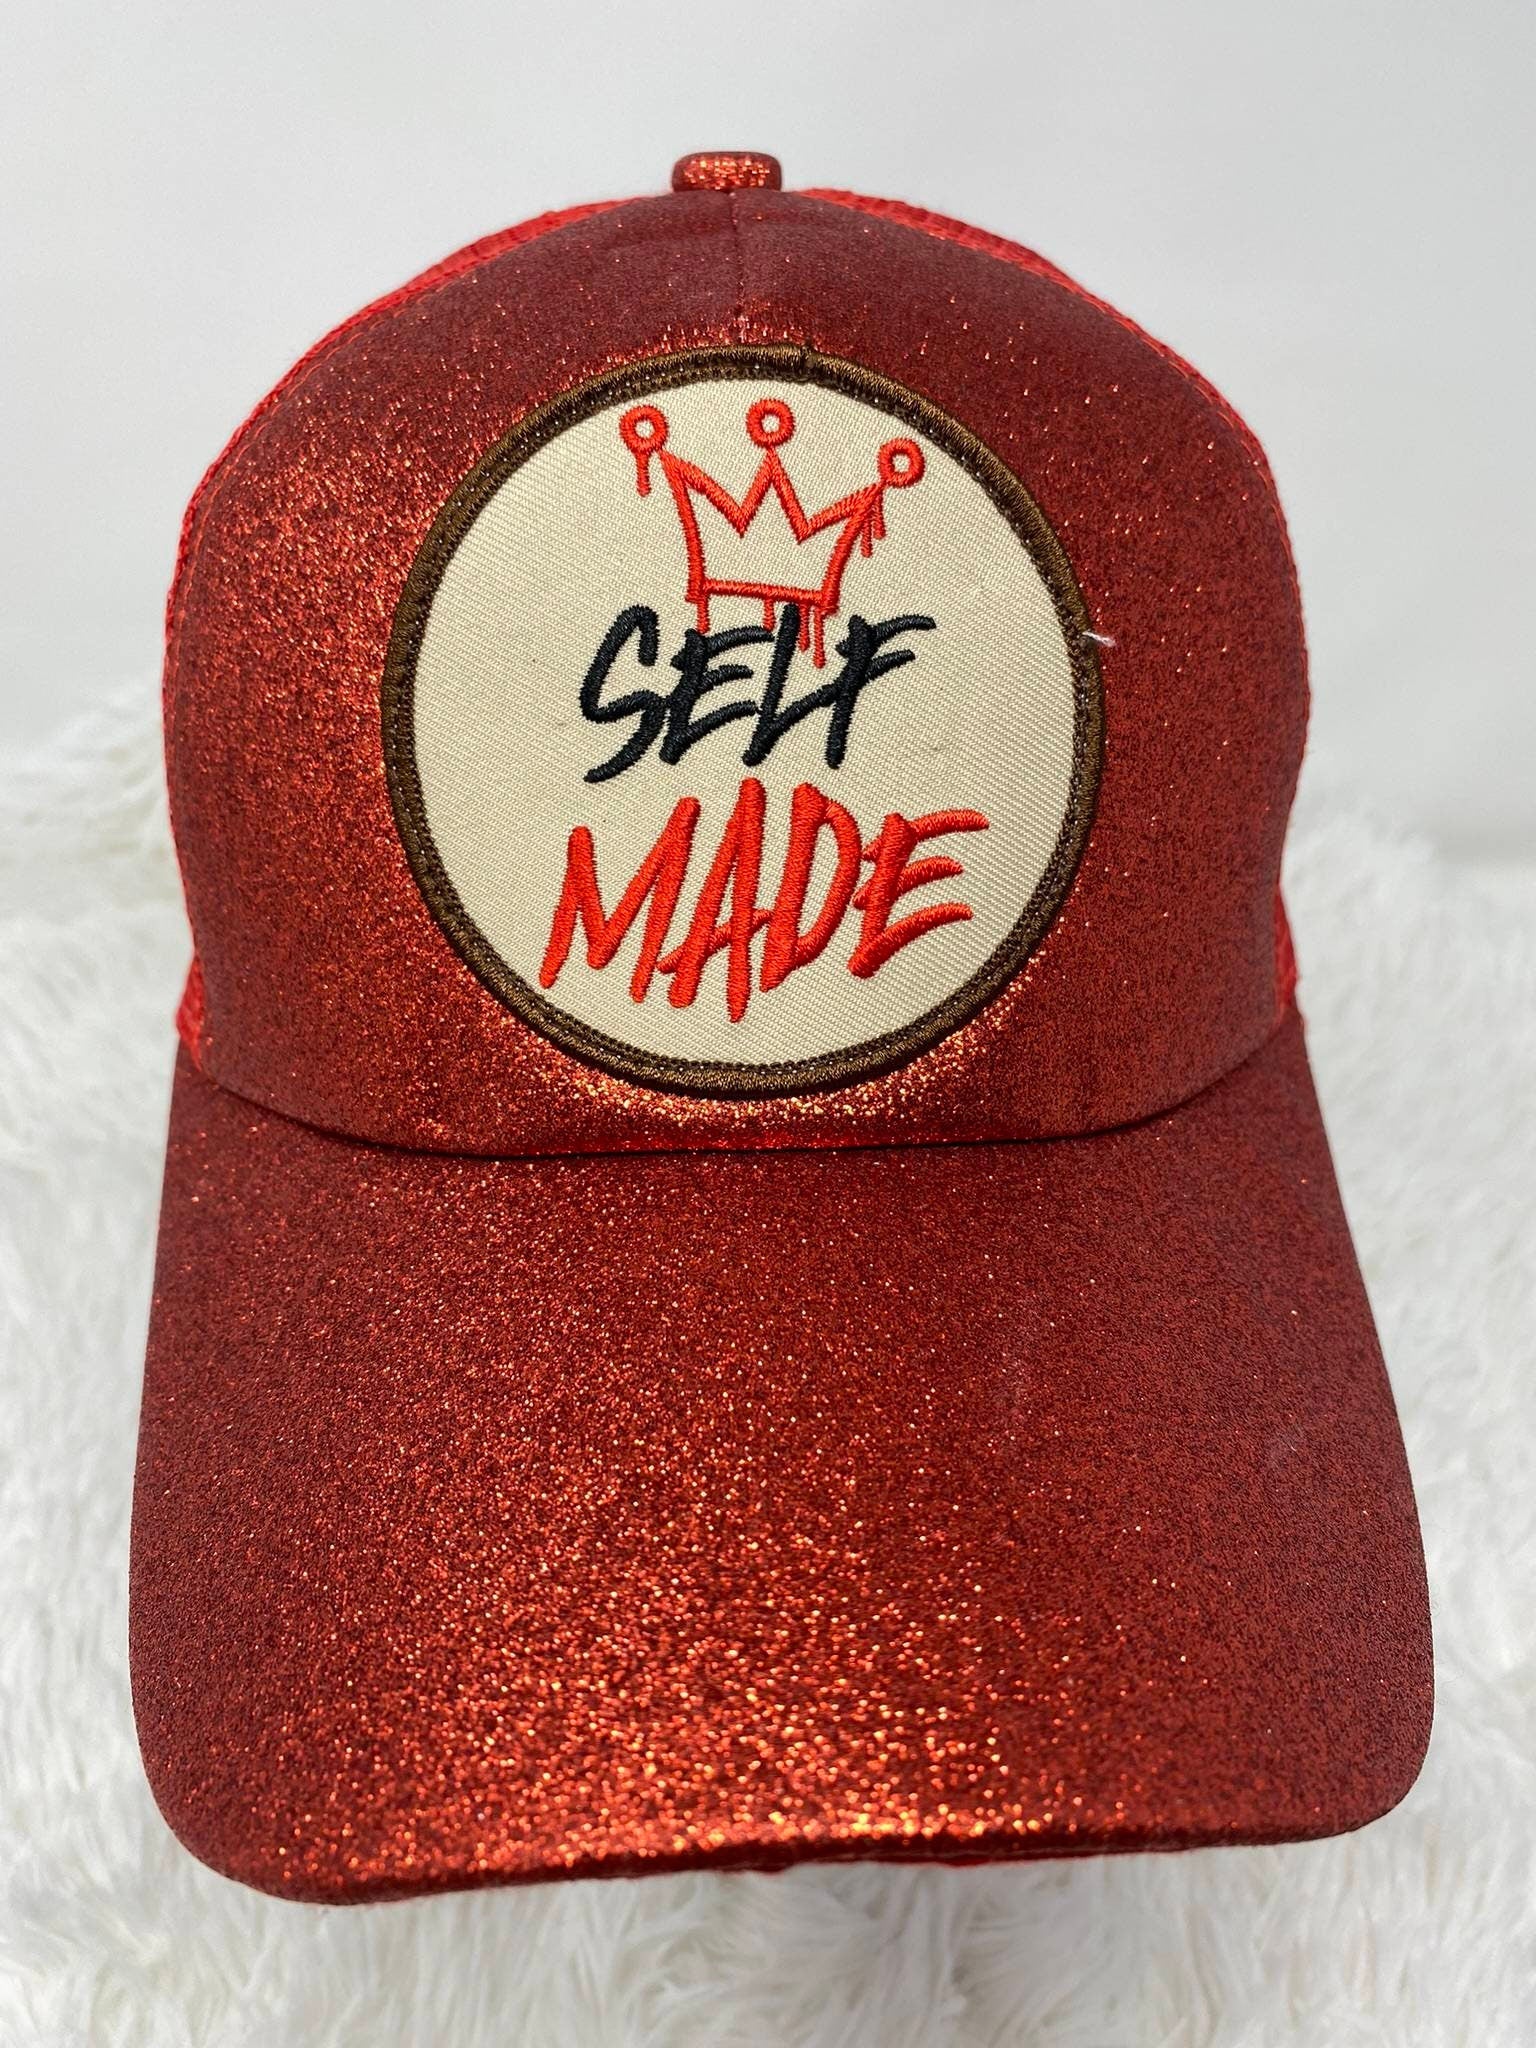 Red Glitter Ponytail Hat, w/"Self-Made" Beige/Red/Black Patch, Sparkling Bad Hair Day Hat, Cute Hat for Sunblocking, & Summer Hairstyles